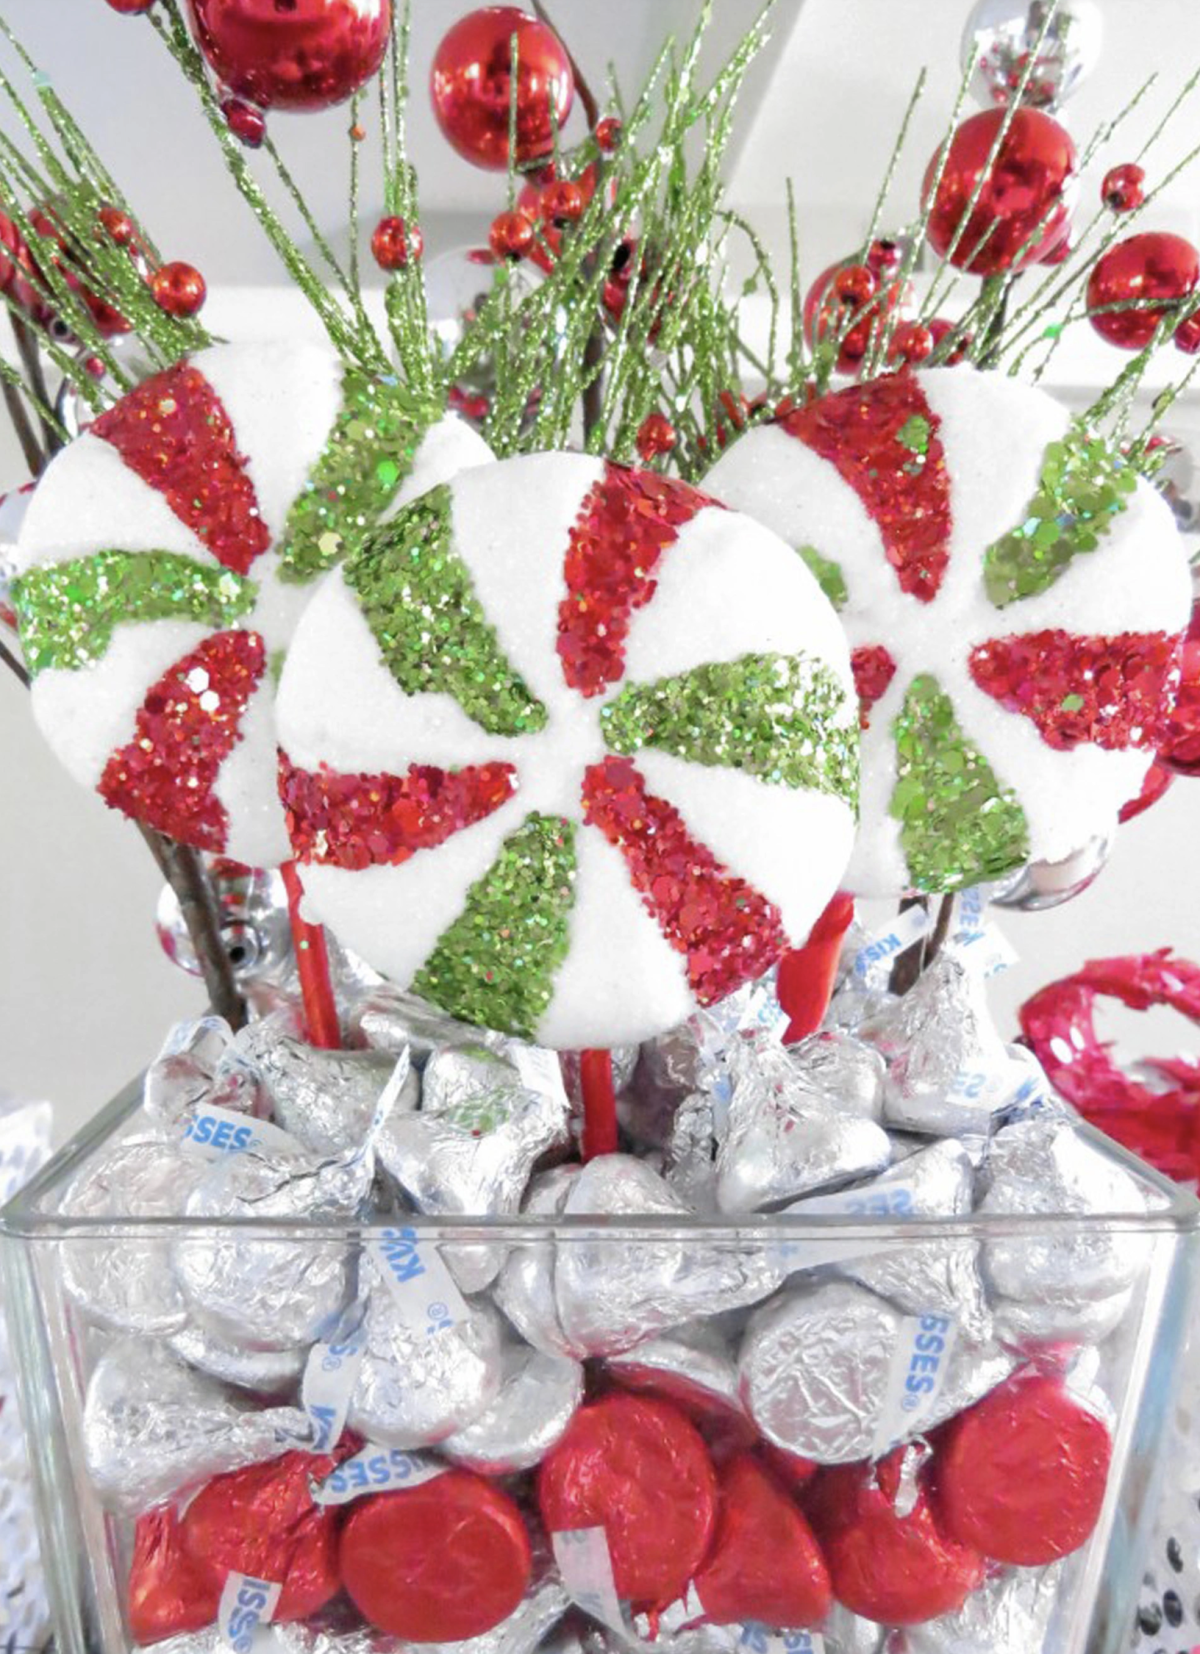 Hershey's Kisses Centerpiece - This centerpiece is not only gorgeous and inviting but best of all, it's edible!